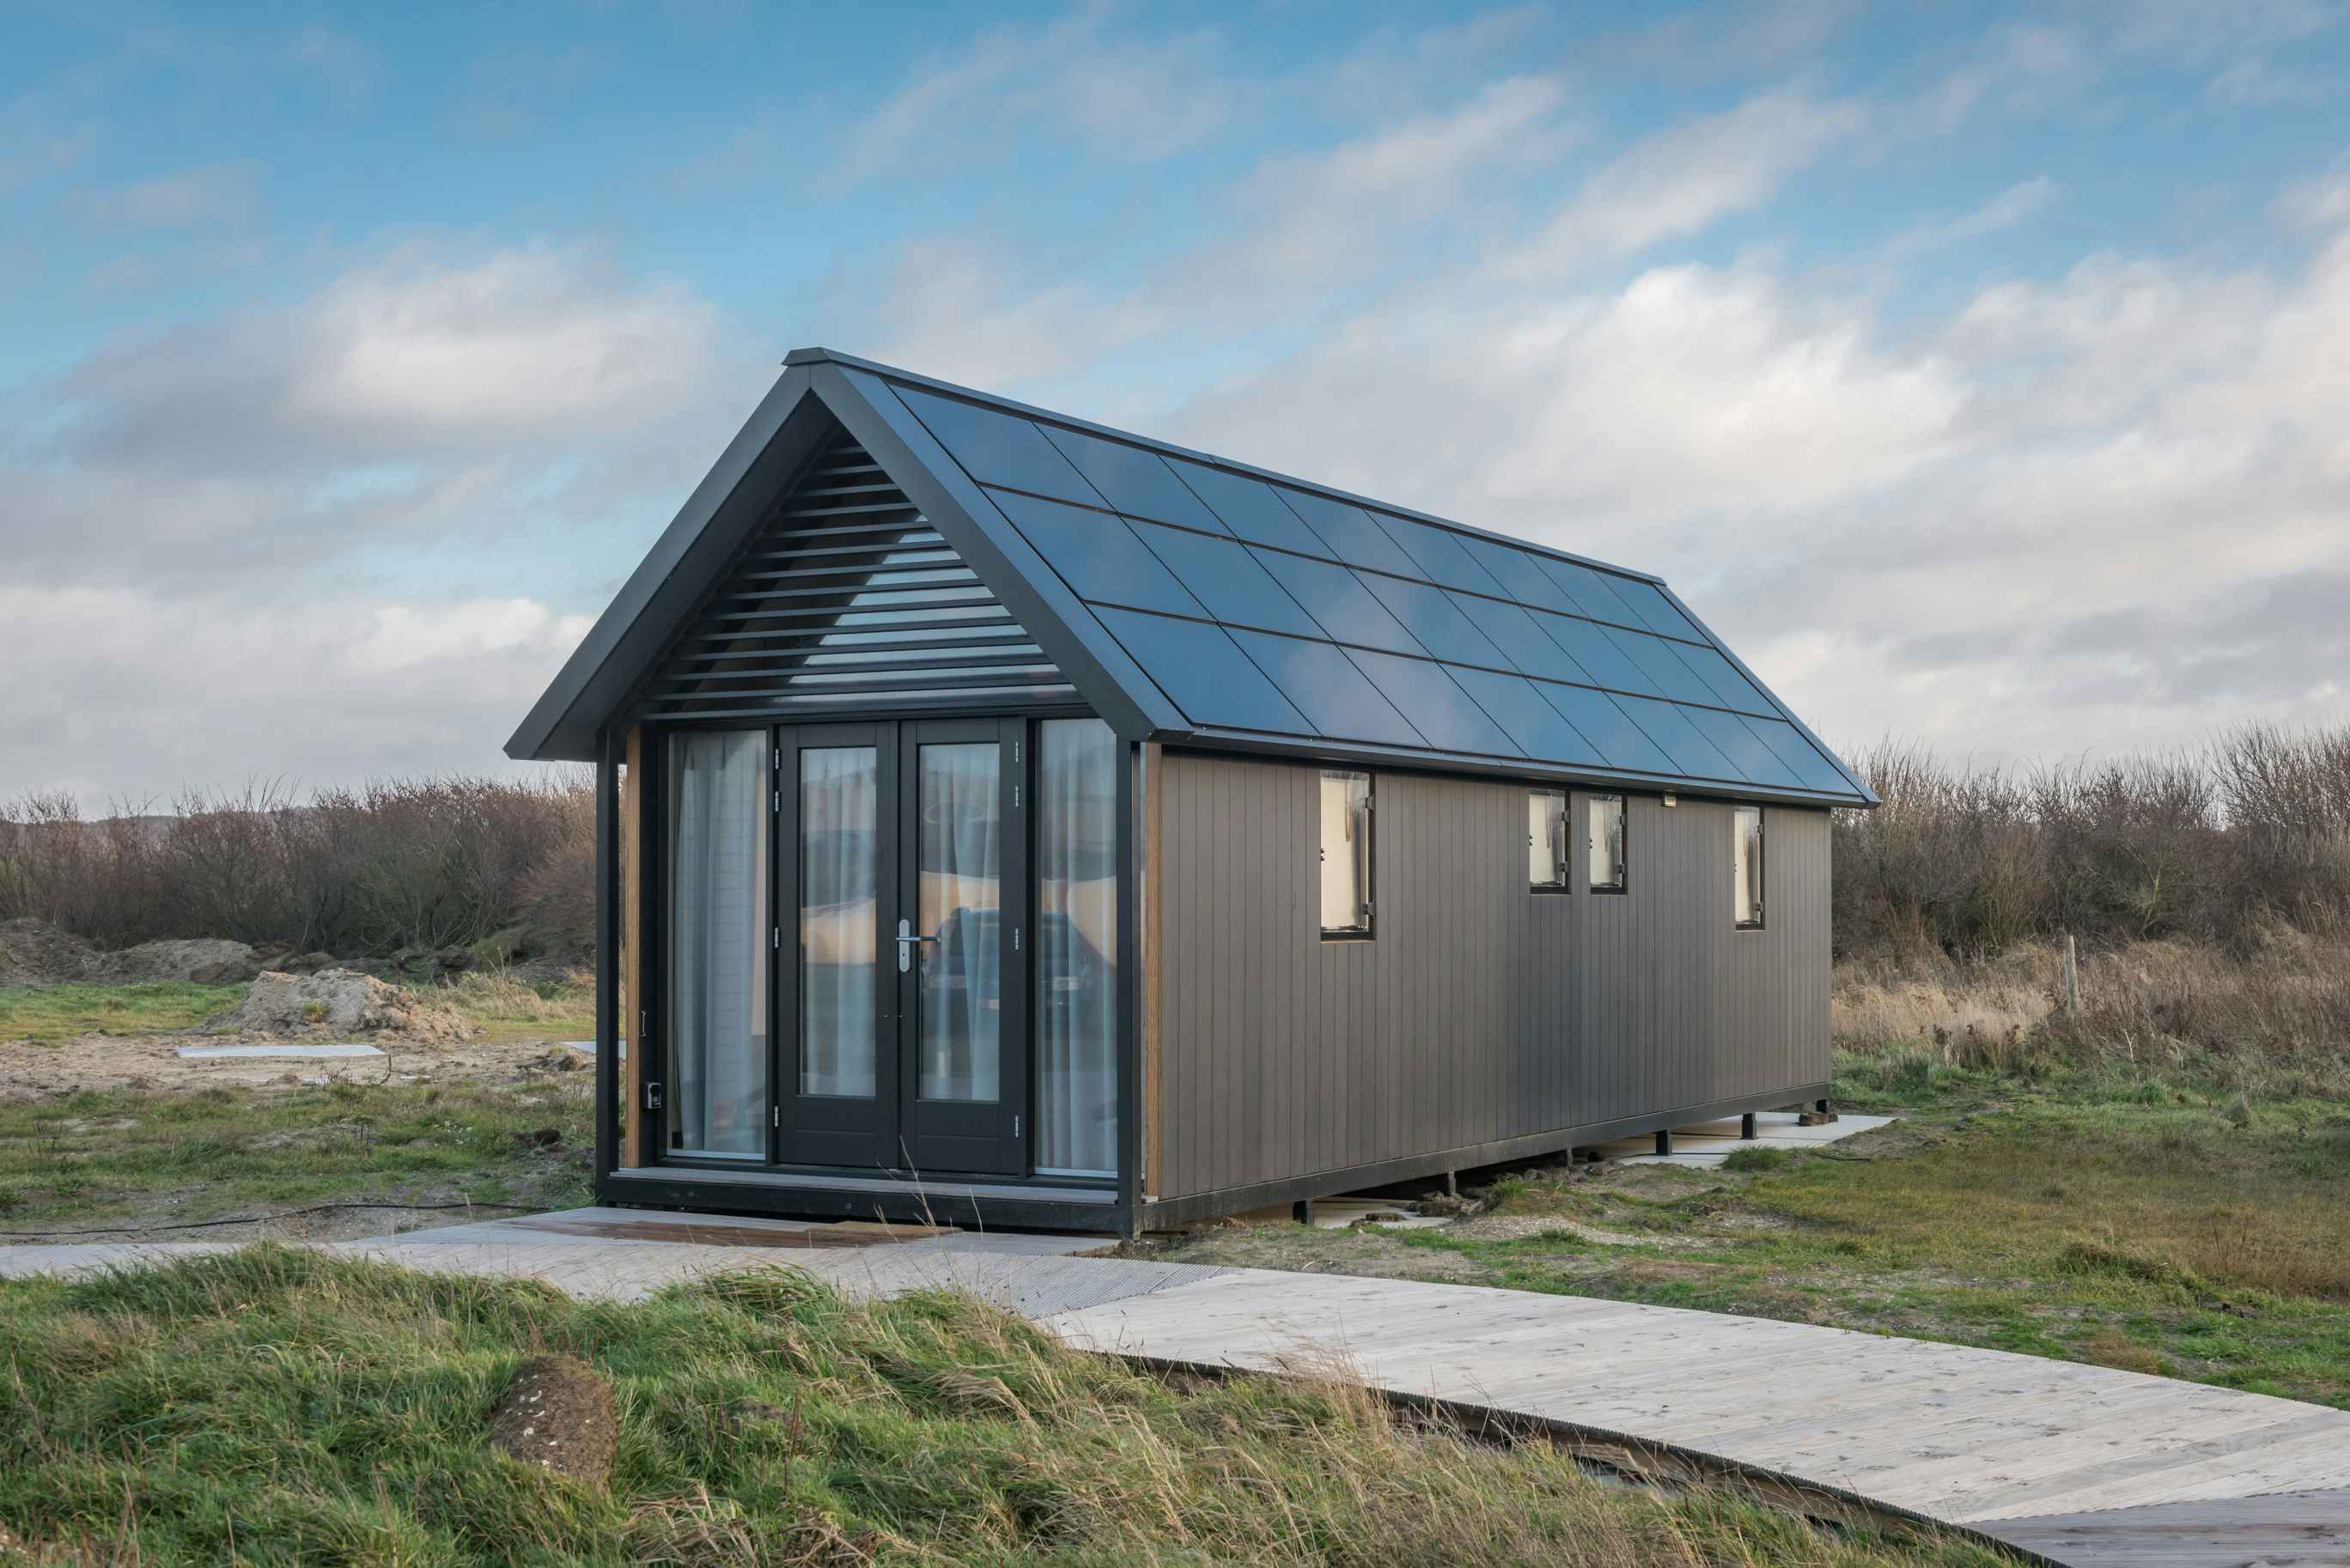 Tiny home with solar panels